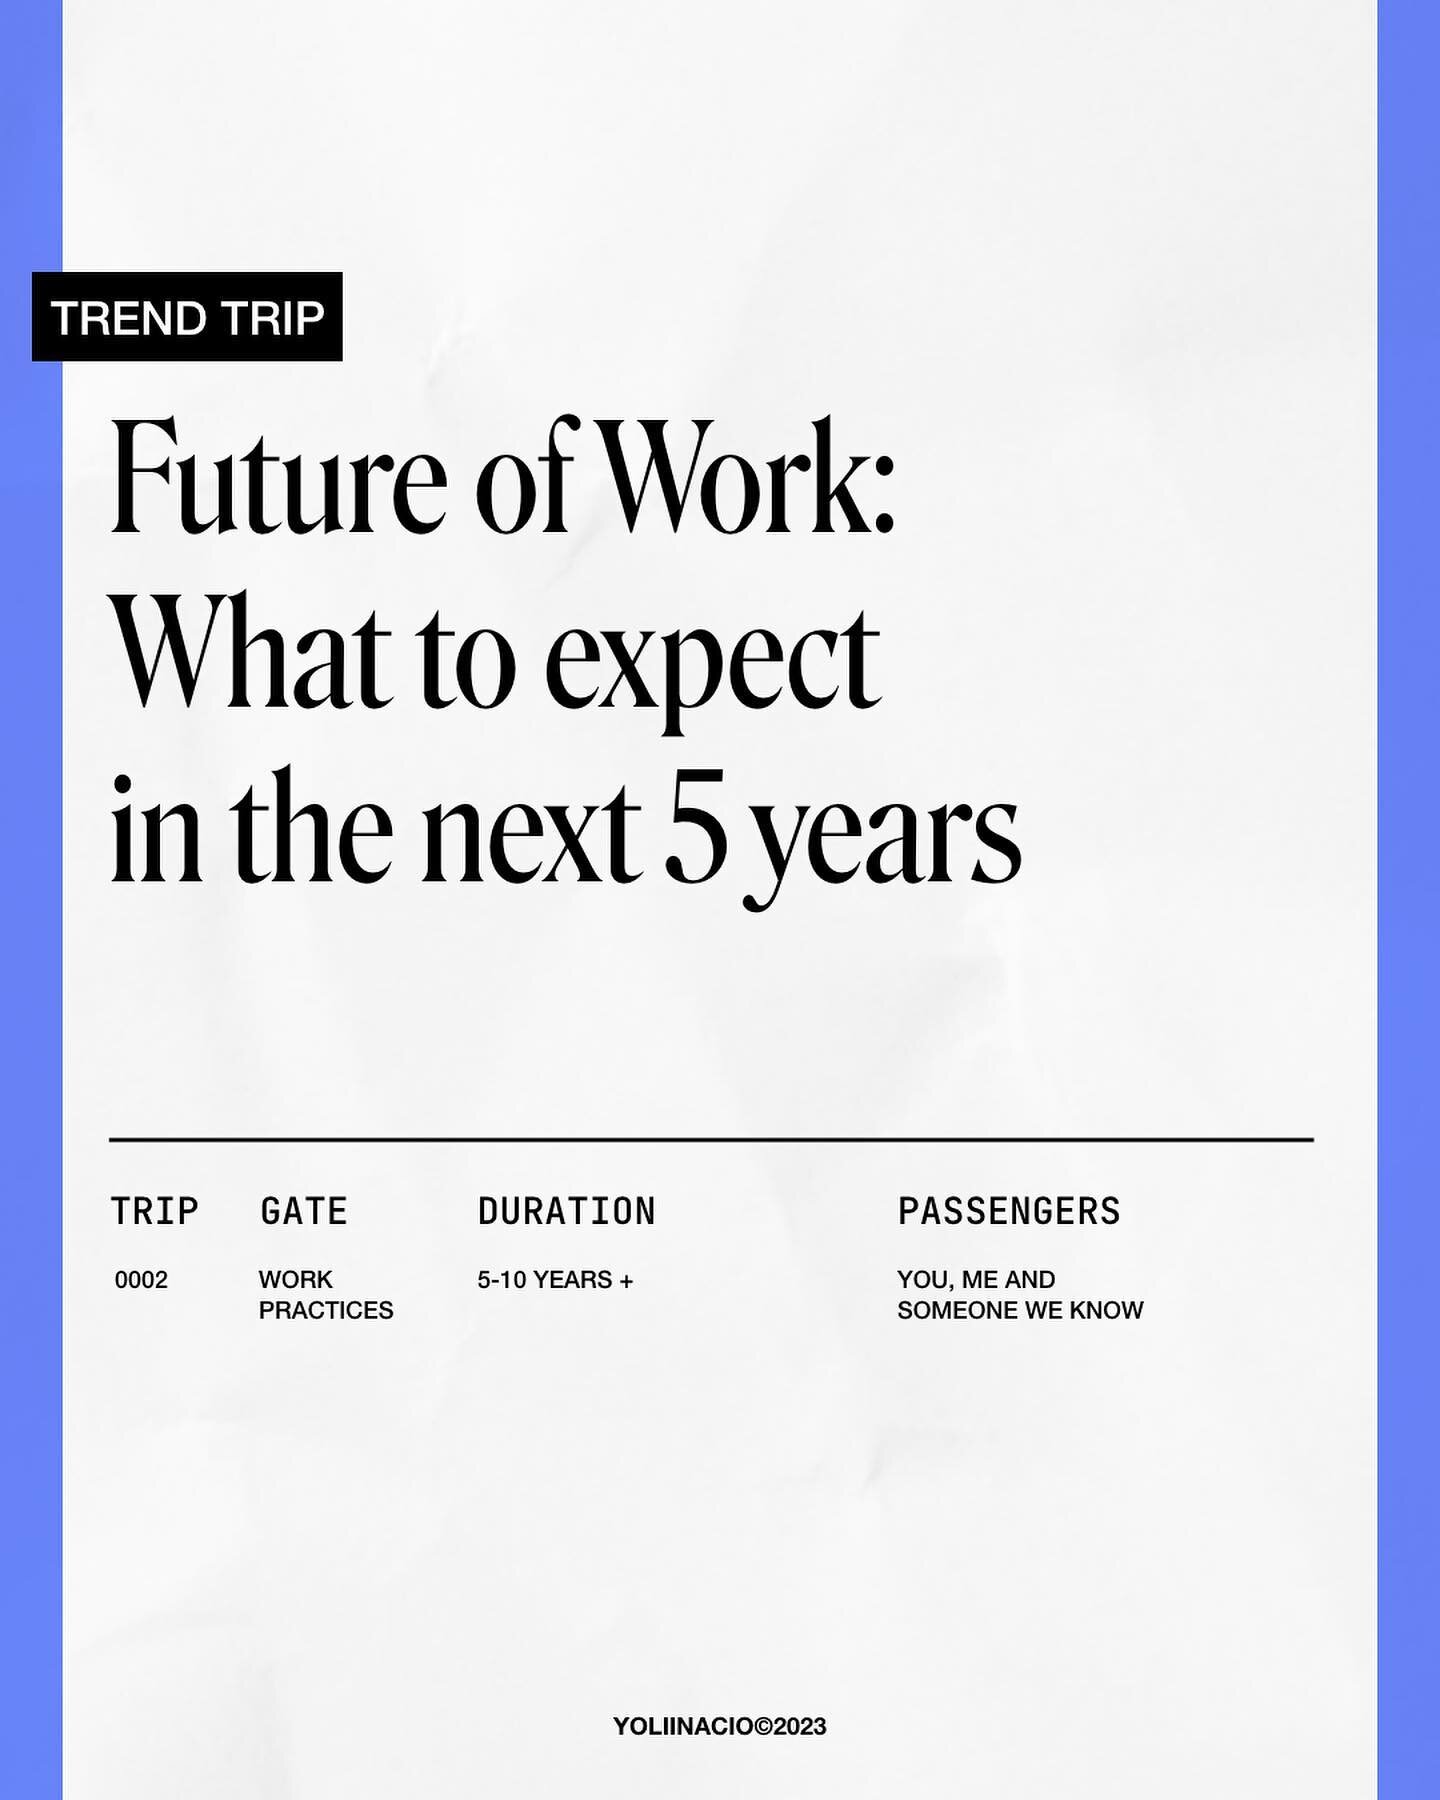 What is the future of your work?